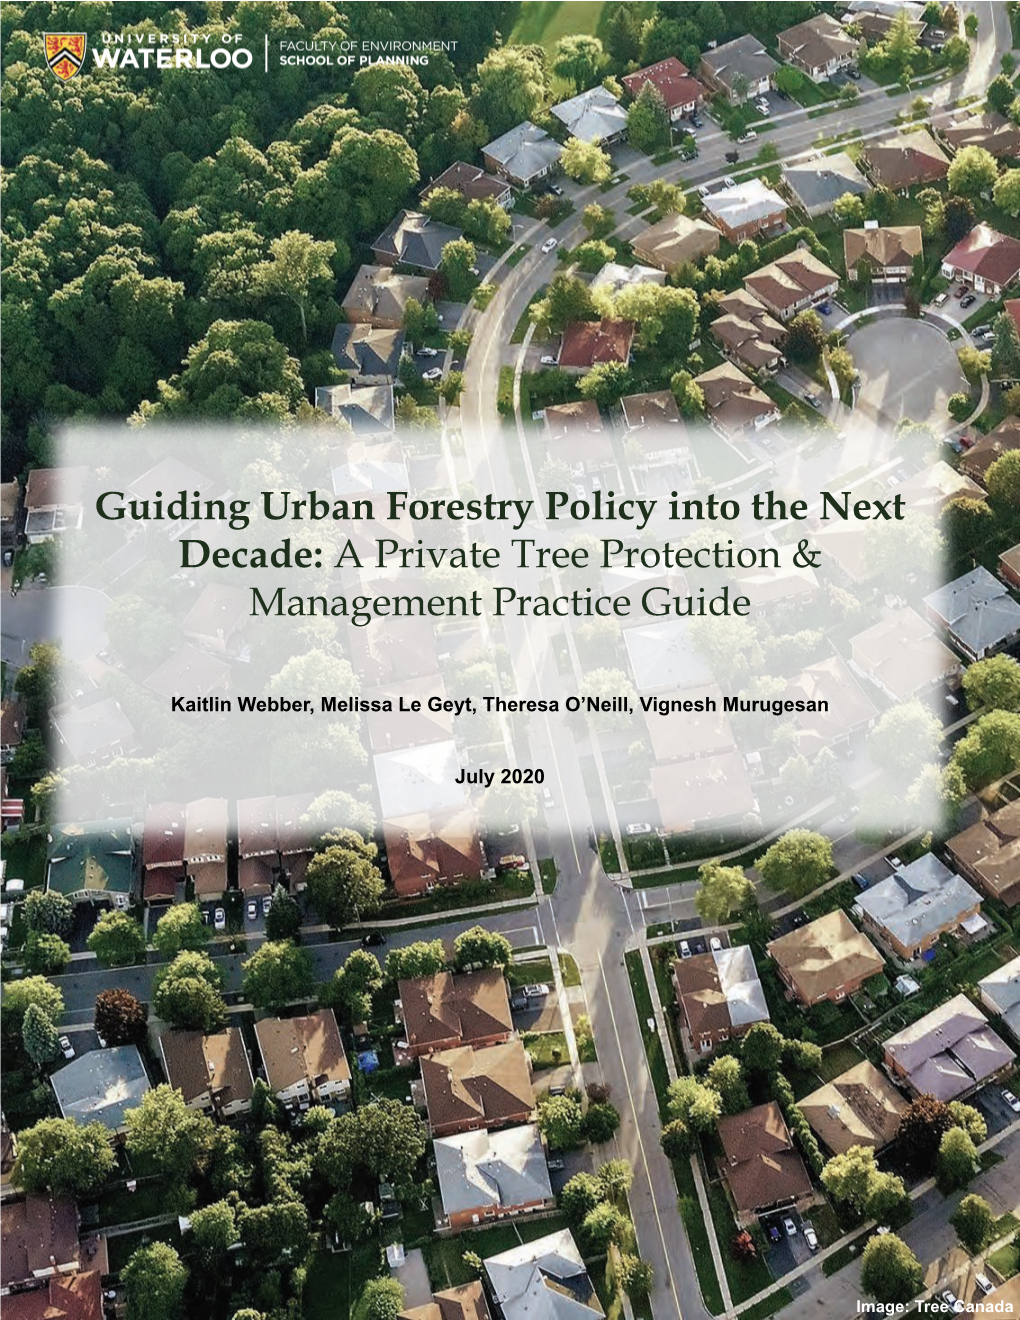 Guiding Urban Forestry Policy Into the Next Decade: a Private Tree Protection & Management Practice Guide